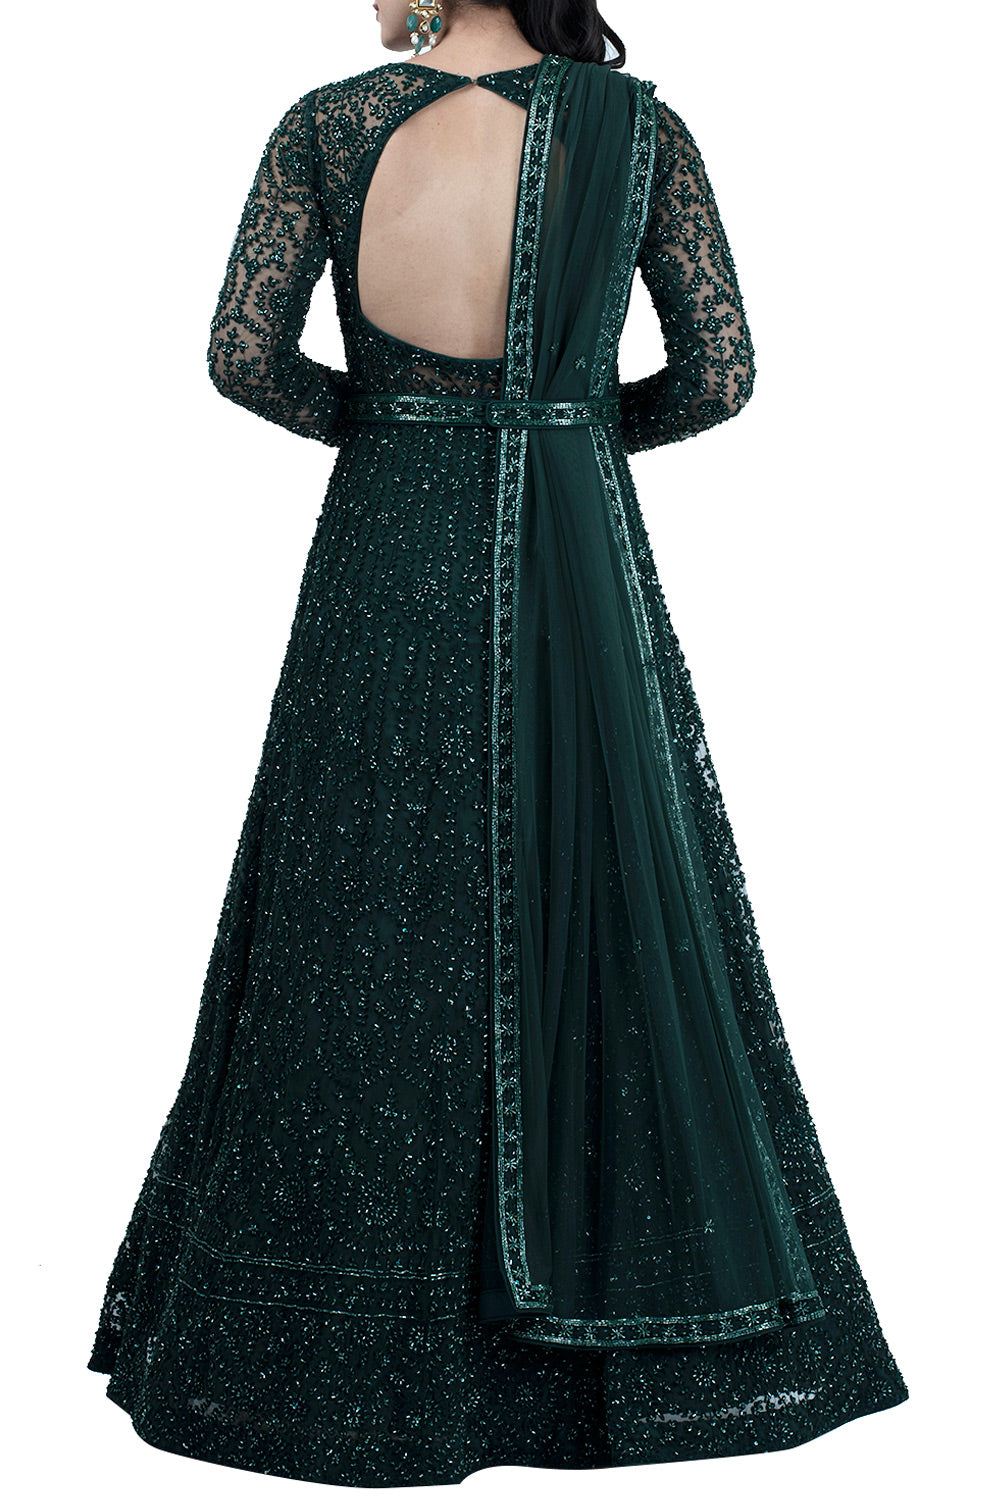 Buy Drashti Dhami Bottle green color georgette party wear anarkali kameez  in UK, USA and Canada | Indian wedding gowns, Party wear dresses, Indian  dresses